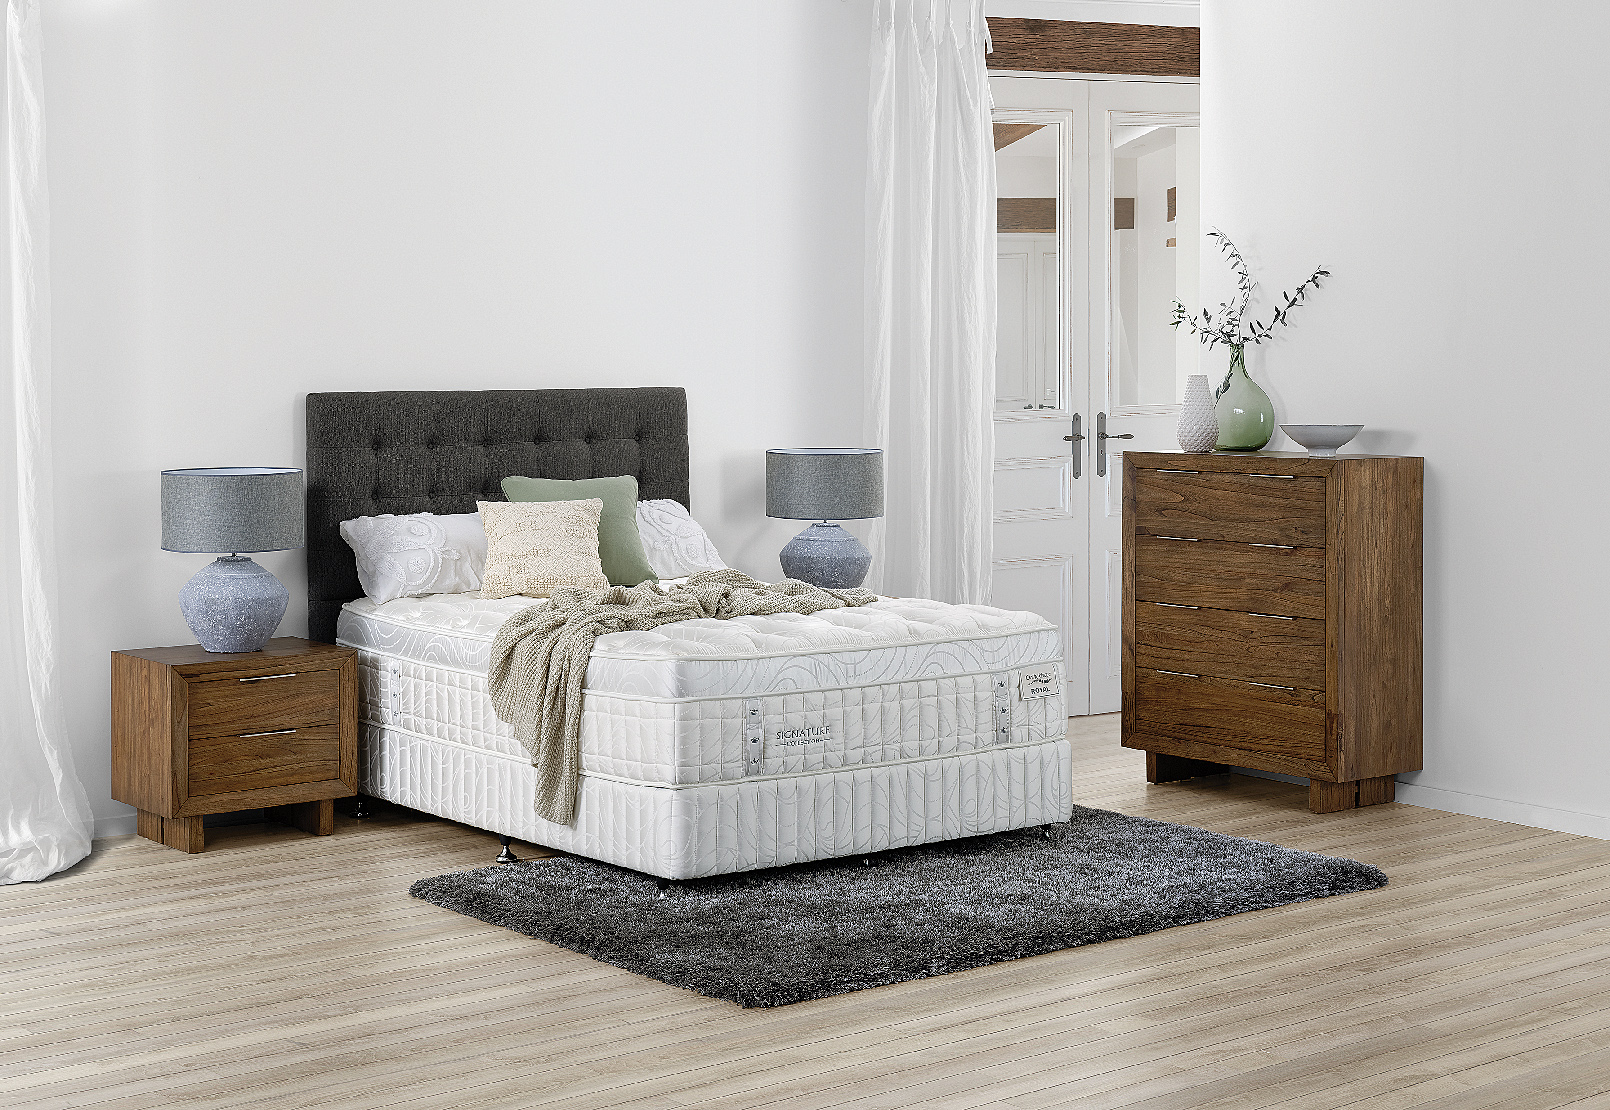 amart bedroom furniture chairs